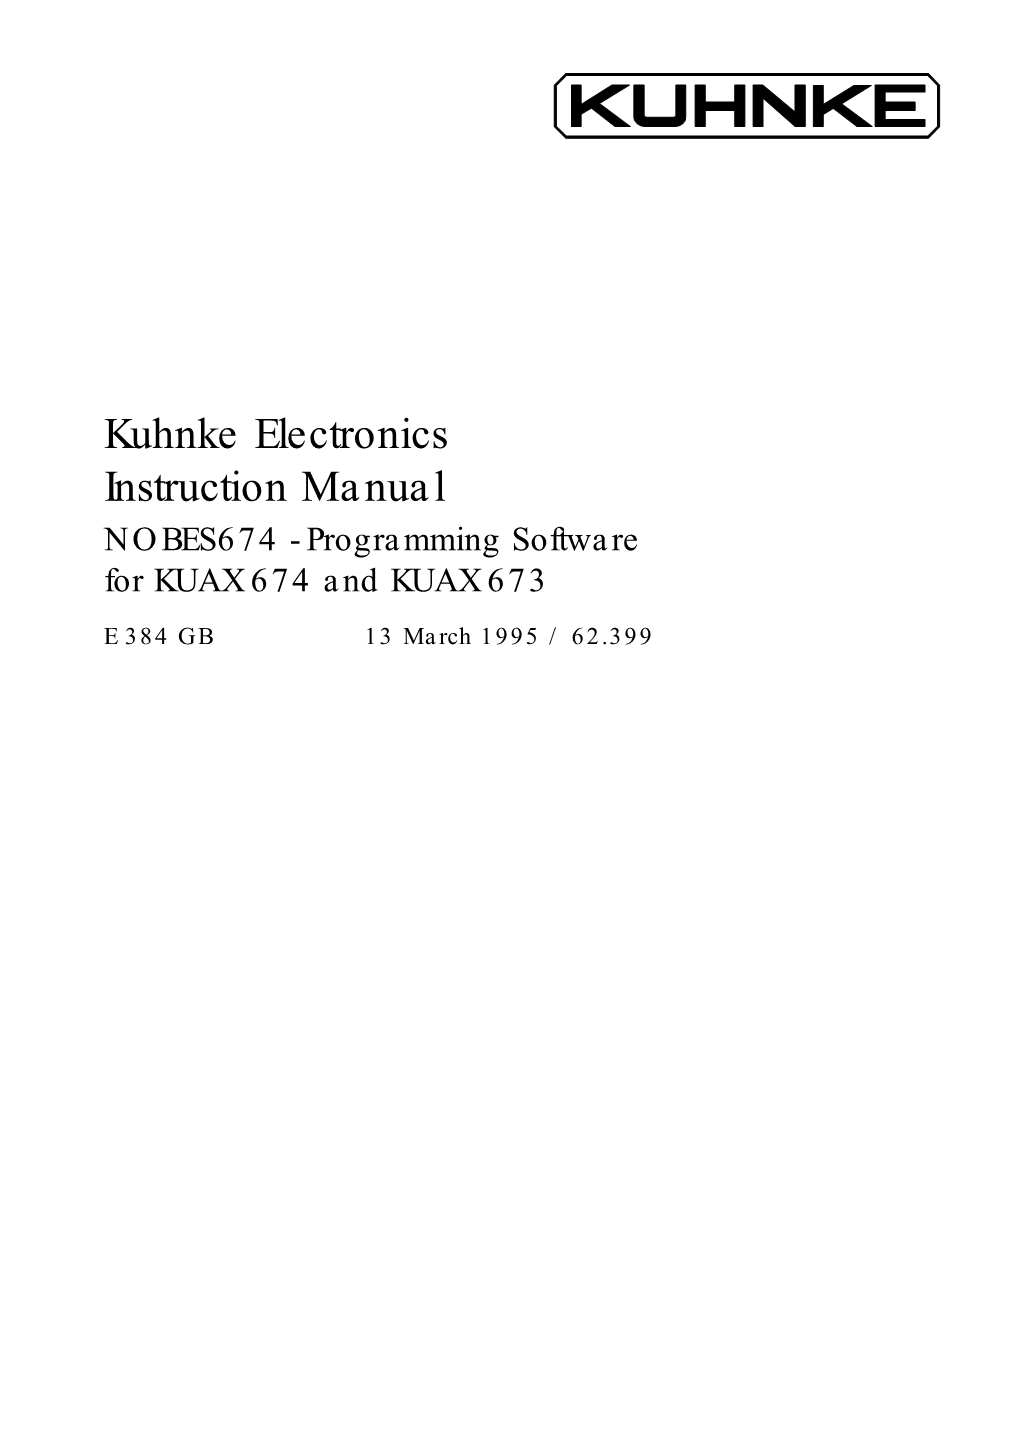 Kuhnke Electronics Instruction Manual NOBES674 - Programming Software for KUAX 674 and KUAX 673